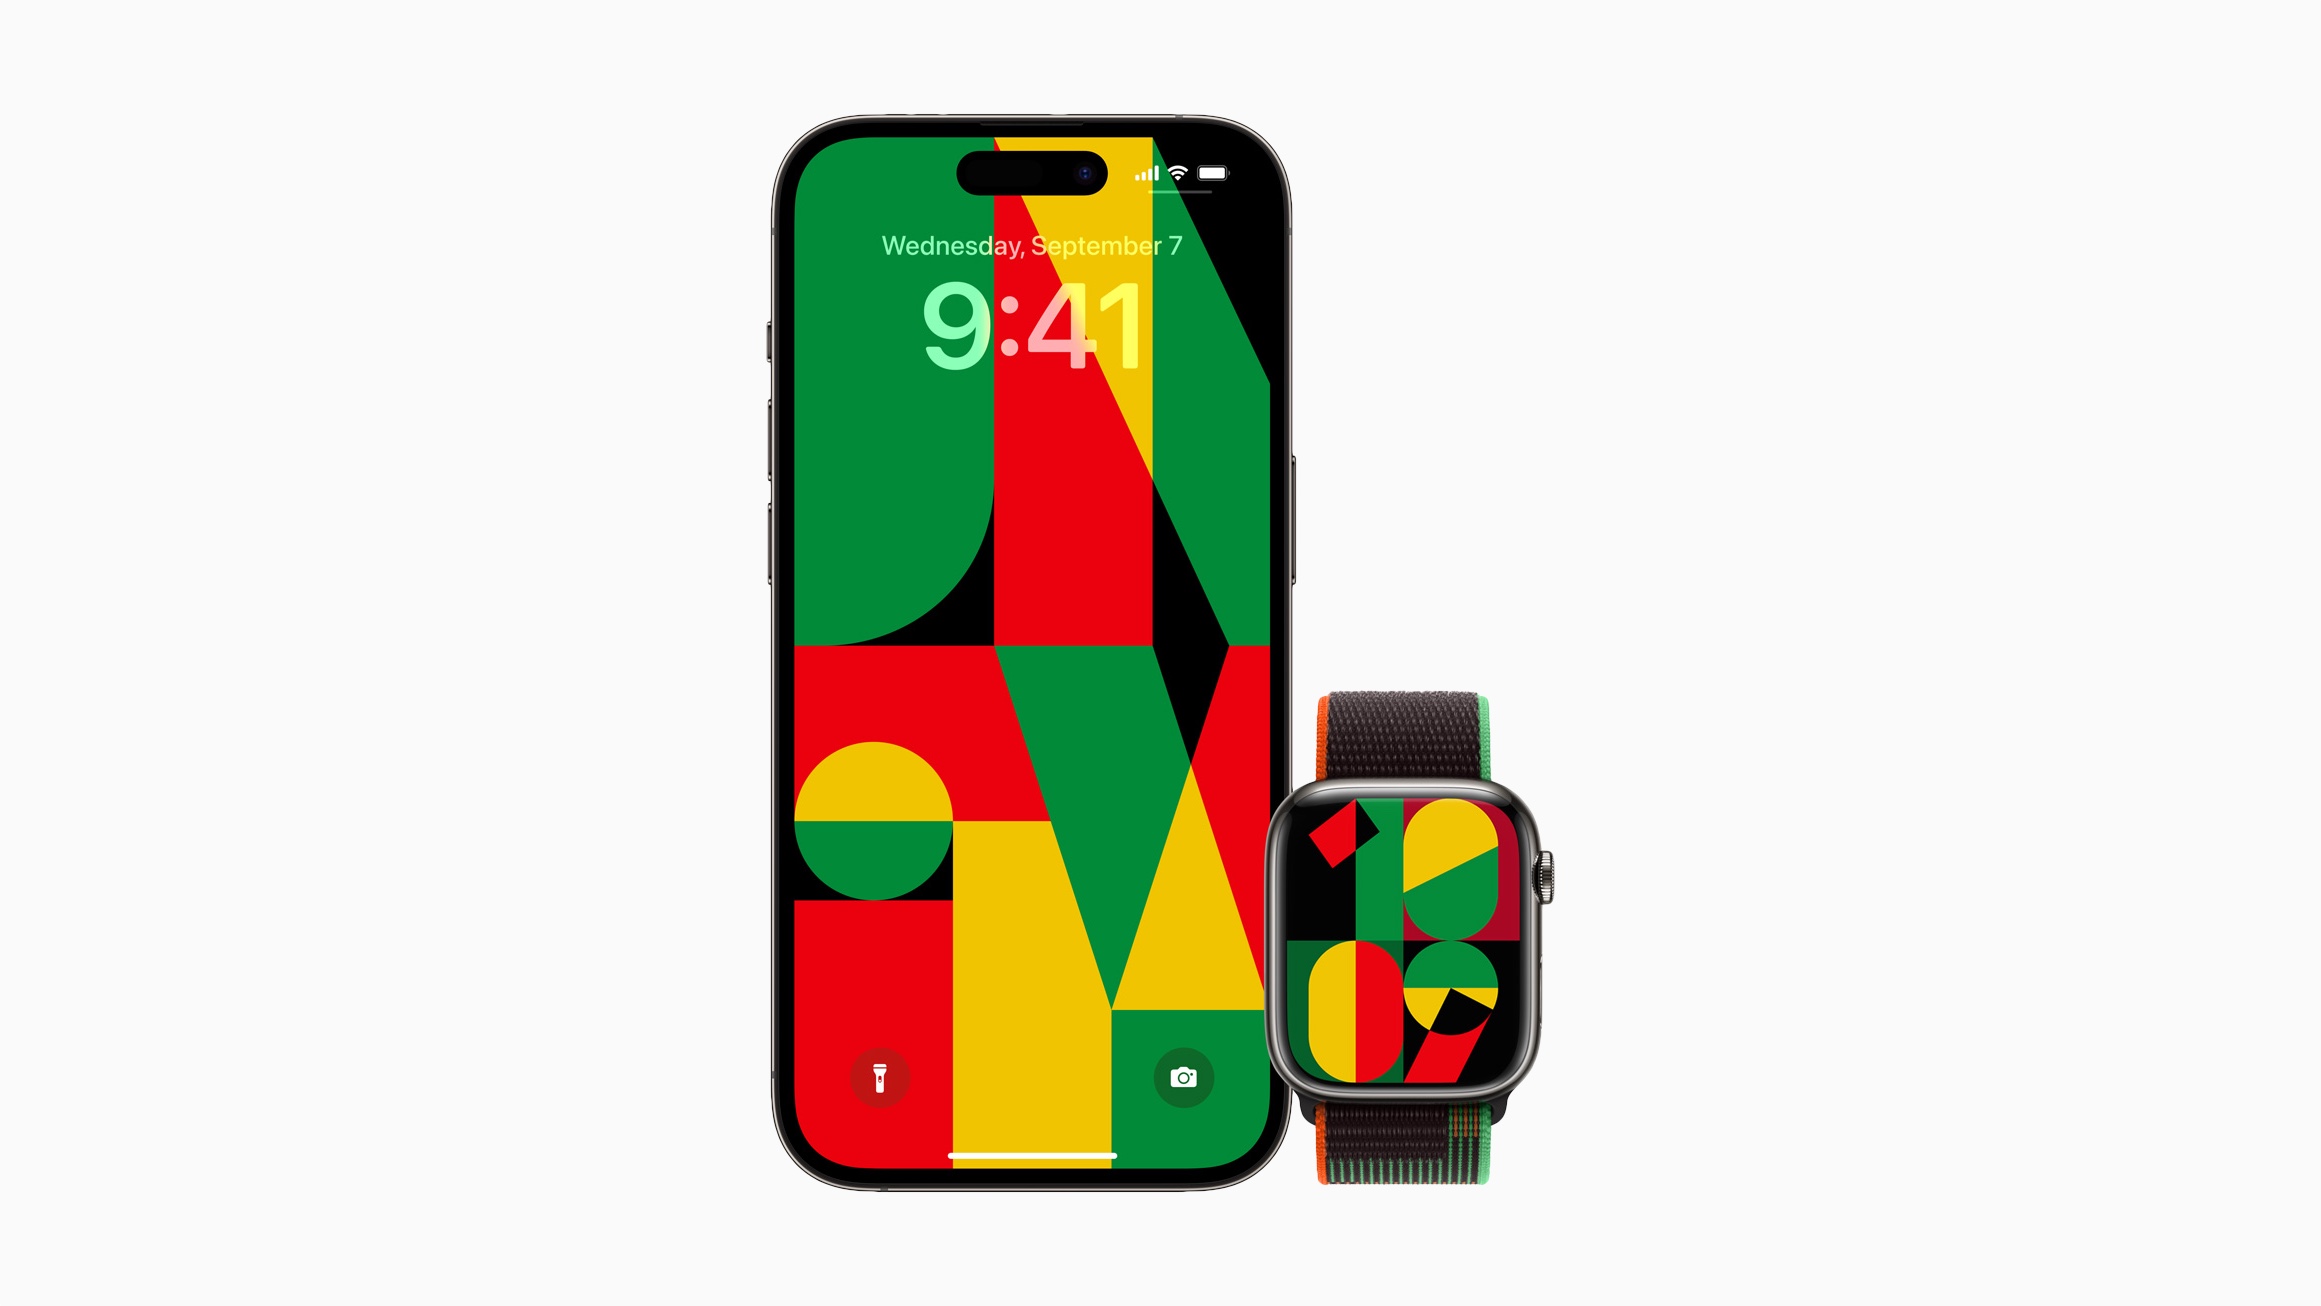 The Apple Watch Black Unity Sport Loop, watch face, and iPhone wallpaper are inspired by the creative process of mosaic, the vitality of black communities, and the power of unity.